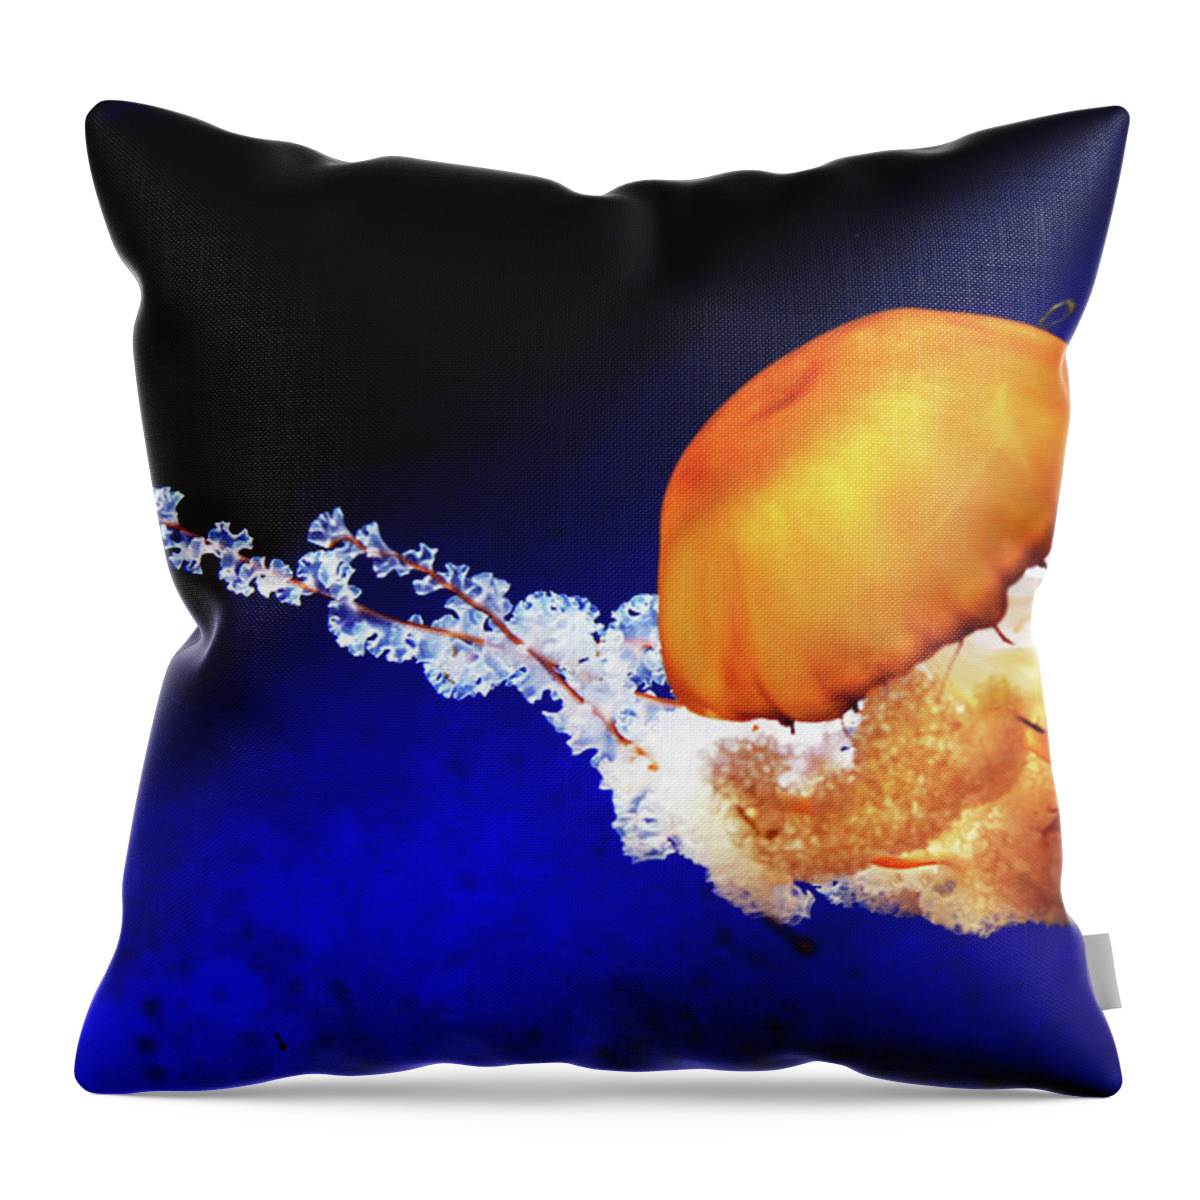 Underwater Throw Pillow featuring the photograph Jellyfish In Aquarium by Digipub